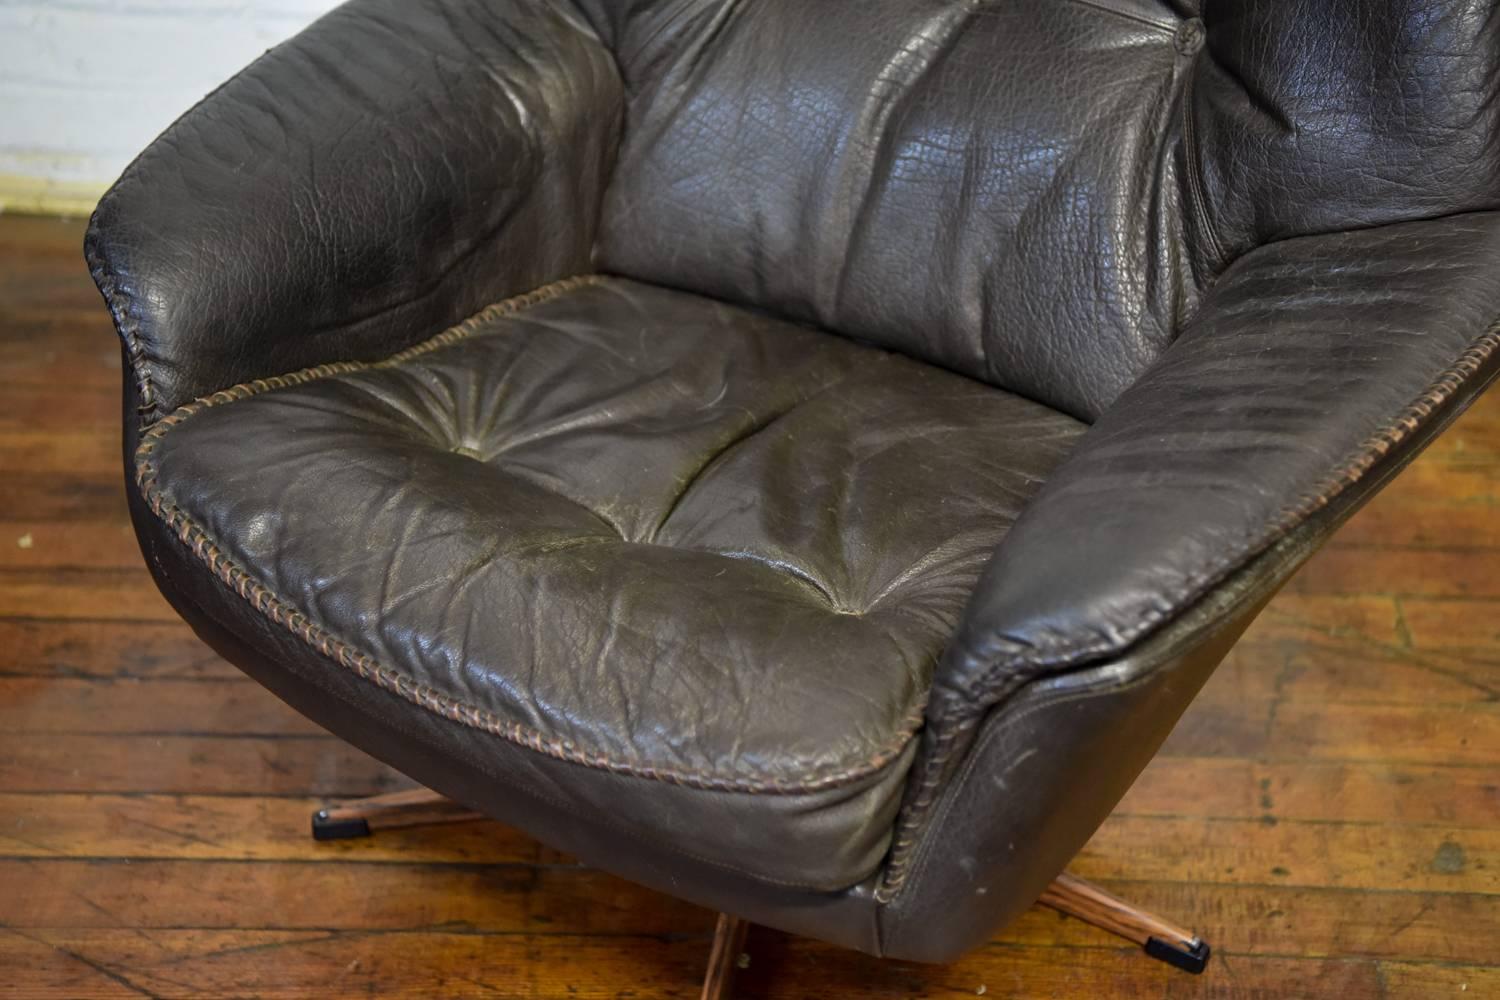 Fantastic leather lounge chair made from hand-stitched top grain leather on a swivel base designed by H. W. Klein for Bramin Mobler in Denmark in the 1960s. This chair is the essence of quality, style and luxury. Sturdy and comfortable. In excellent